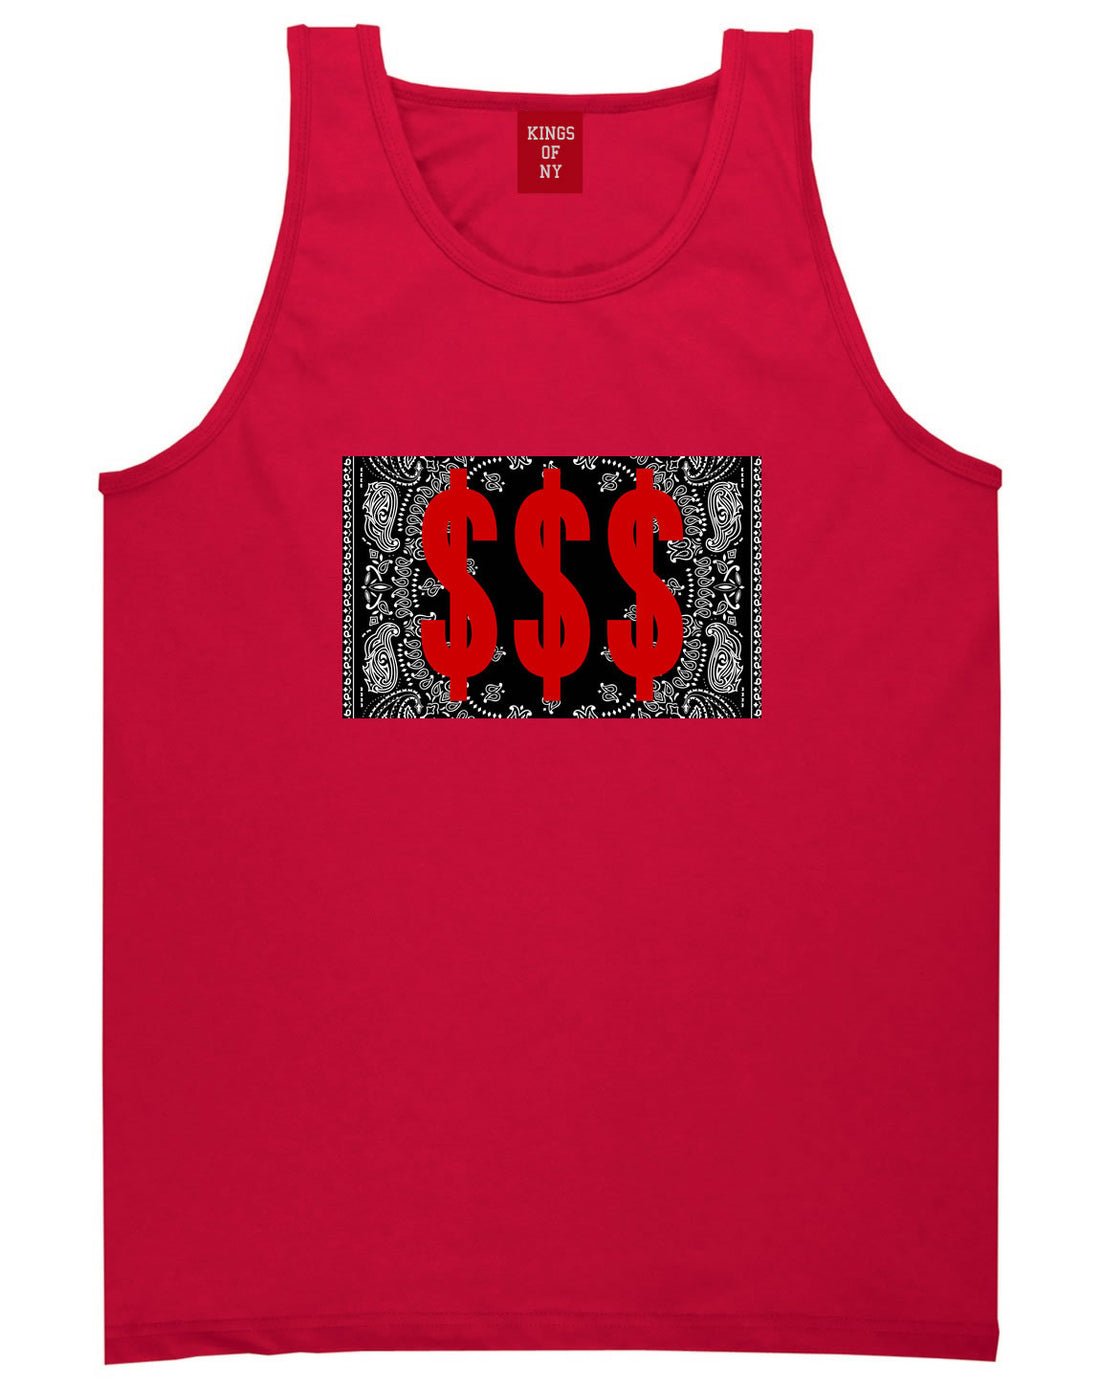 Money Bandana Gang Tank Top in Red By Kings Of NY